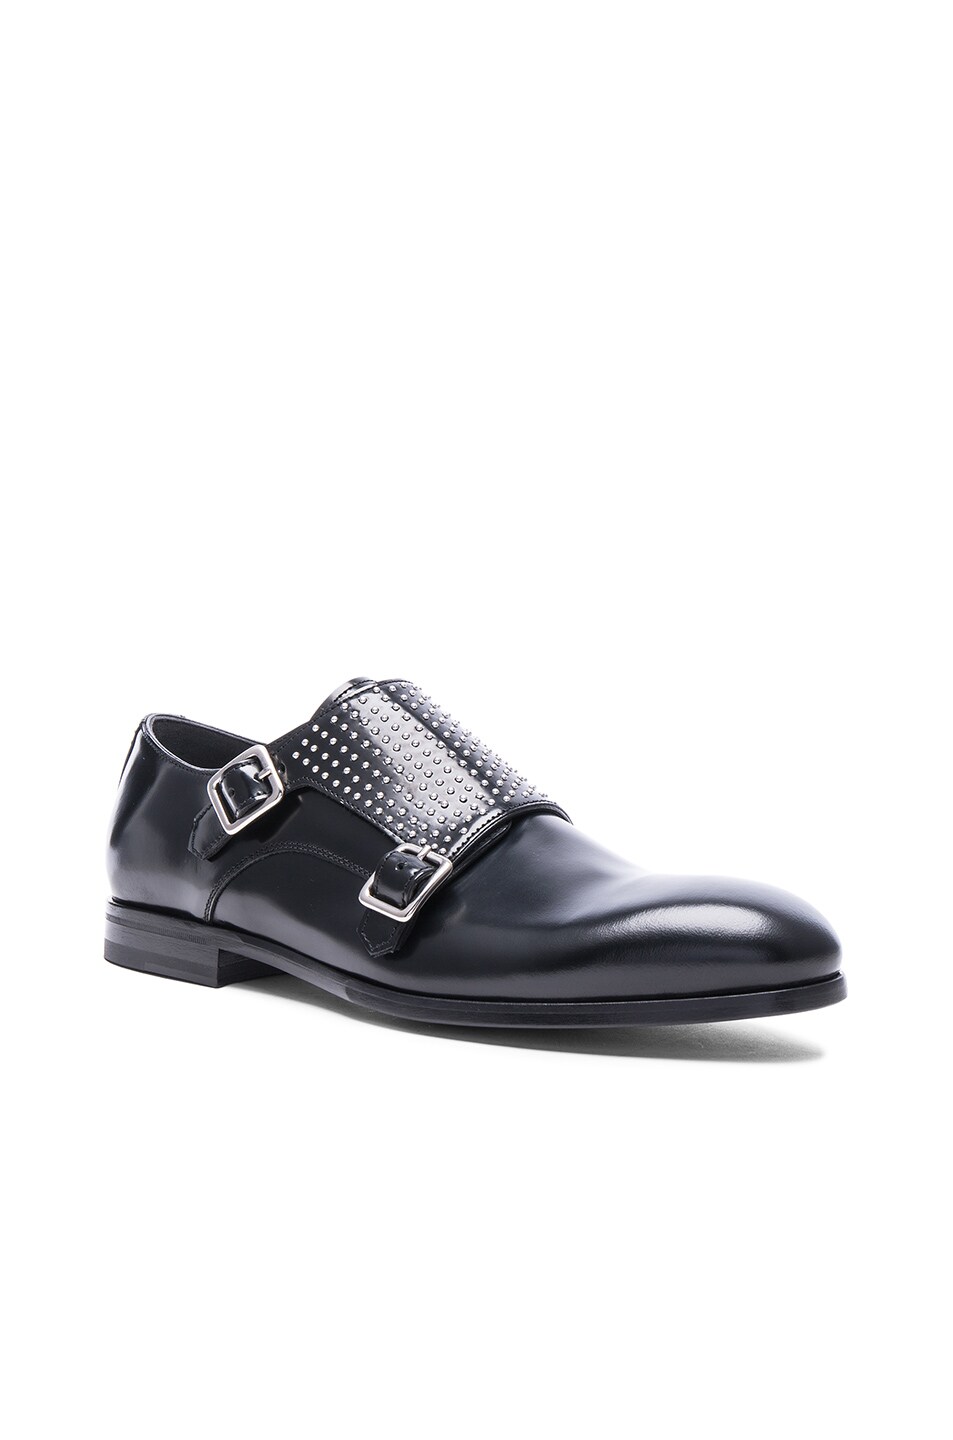 Image 1 of Alexander McQueen Studded Double Monkstrap Leather Shoes in Black